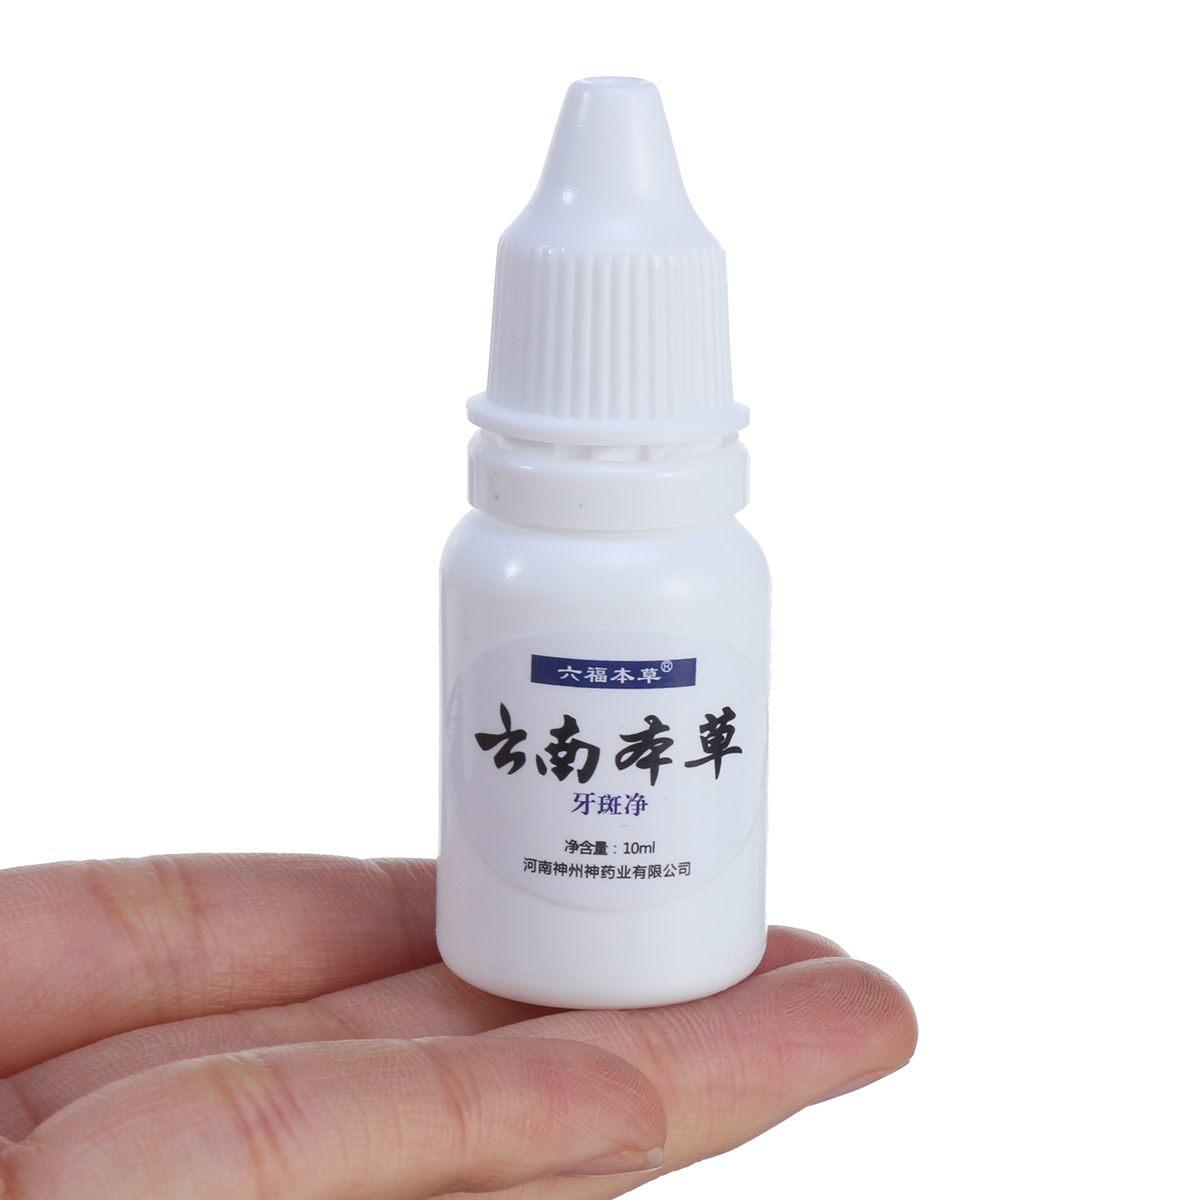 Herb-Teeth-Whitening-Cleansing-Serum-Essence-Oral-Hygiene-Effectively-Removes-Tartars-Plaque-Stains--1815887-9